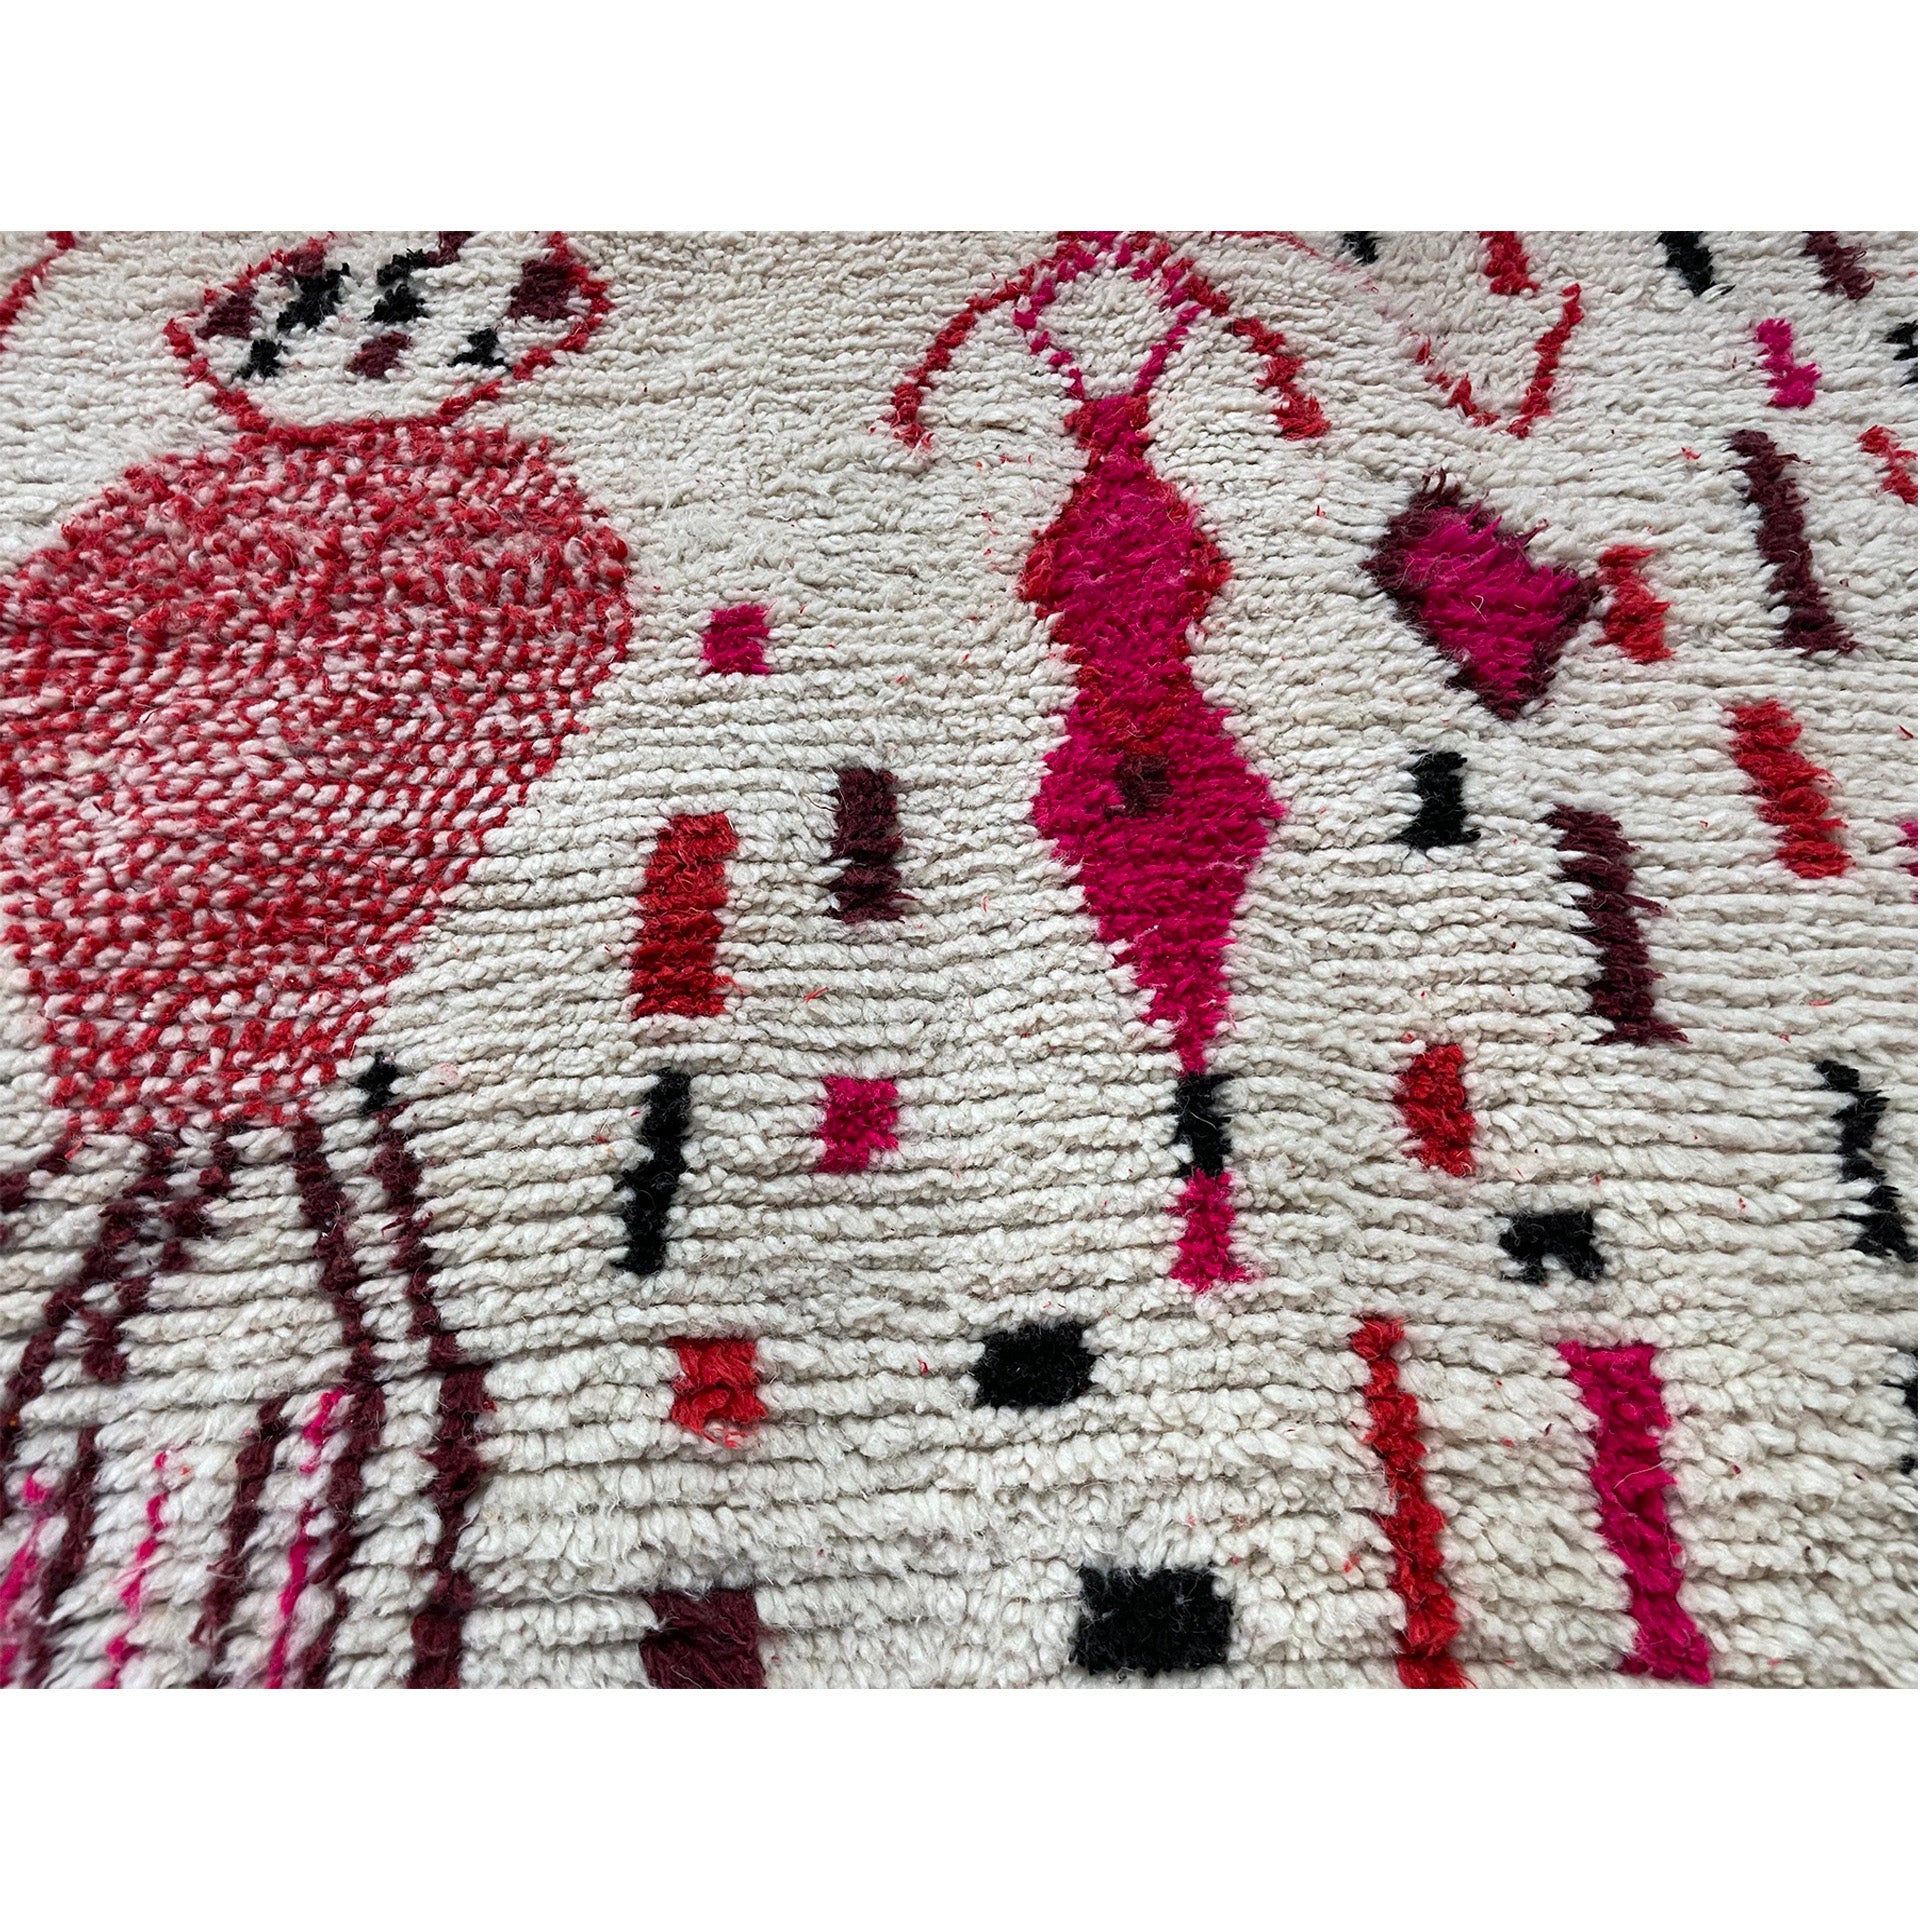 Cream colored vintage Moroccan rug with pink and red pattern - Kantara | Moroccan Rugs